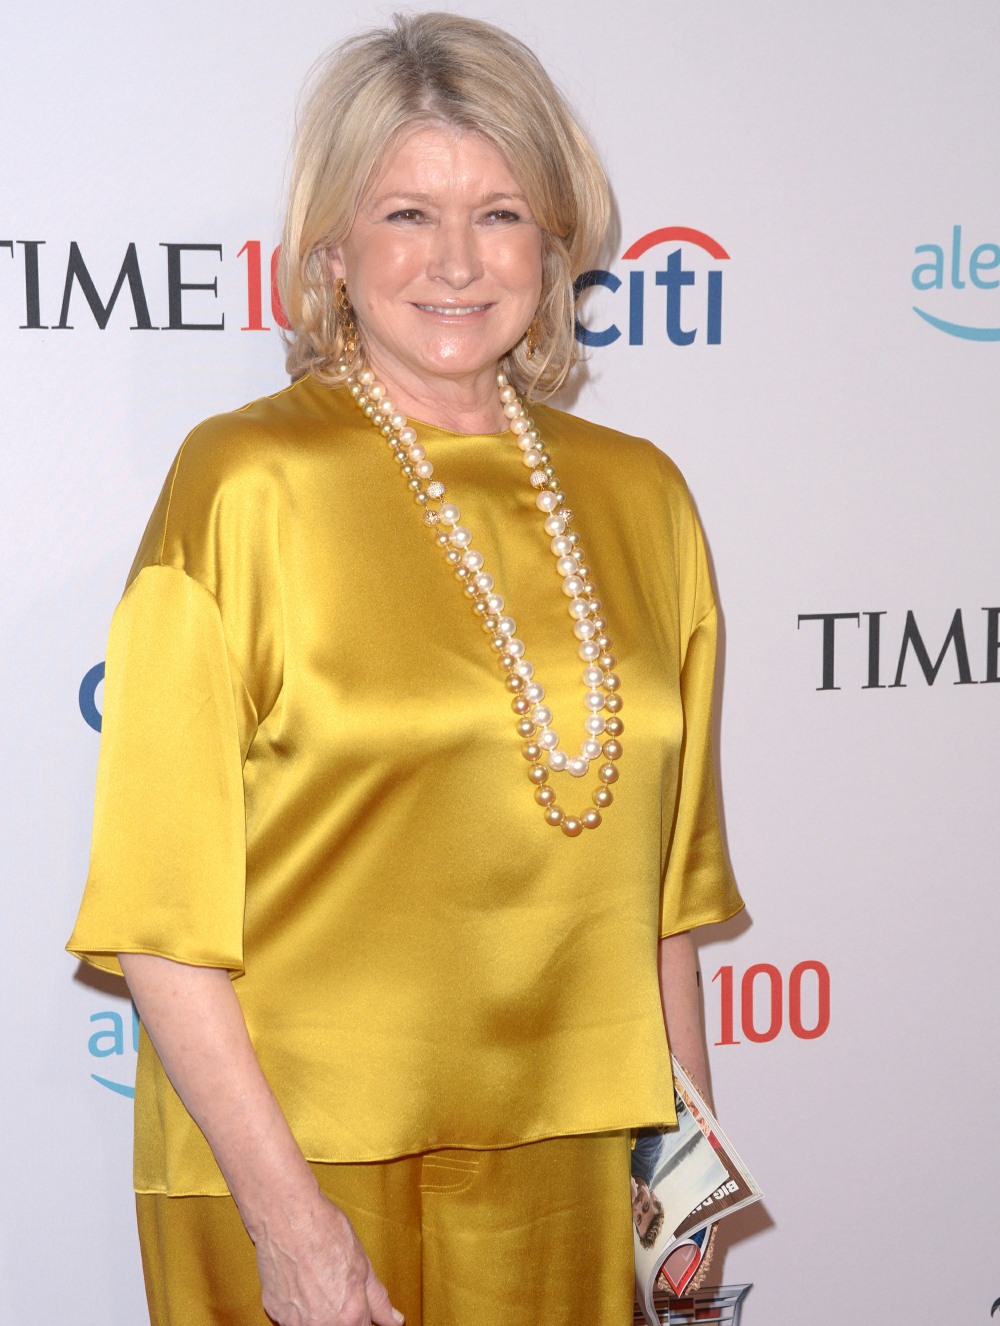 TIME 100 Gala 2019 - Arrivals